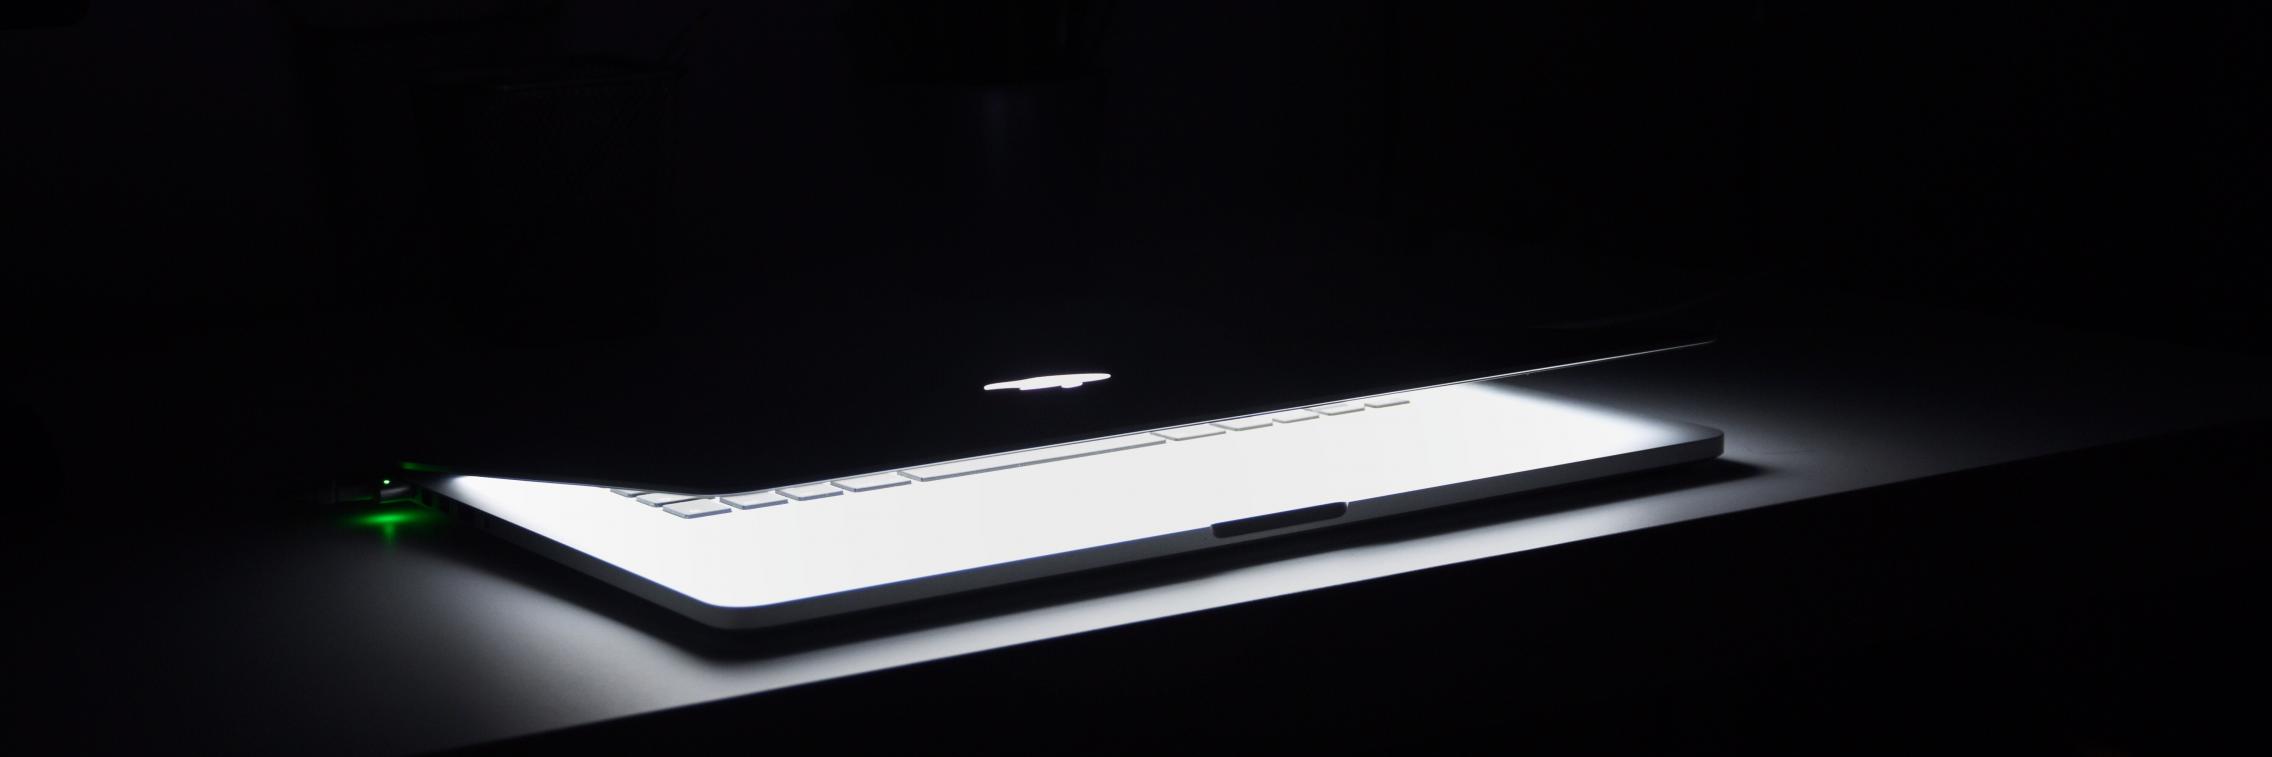 A partially-closed Mac laptop in the dark